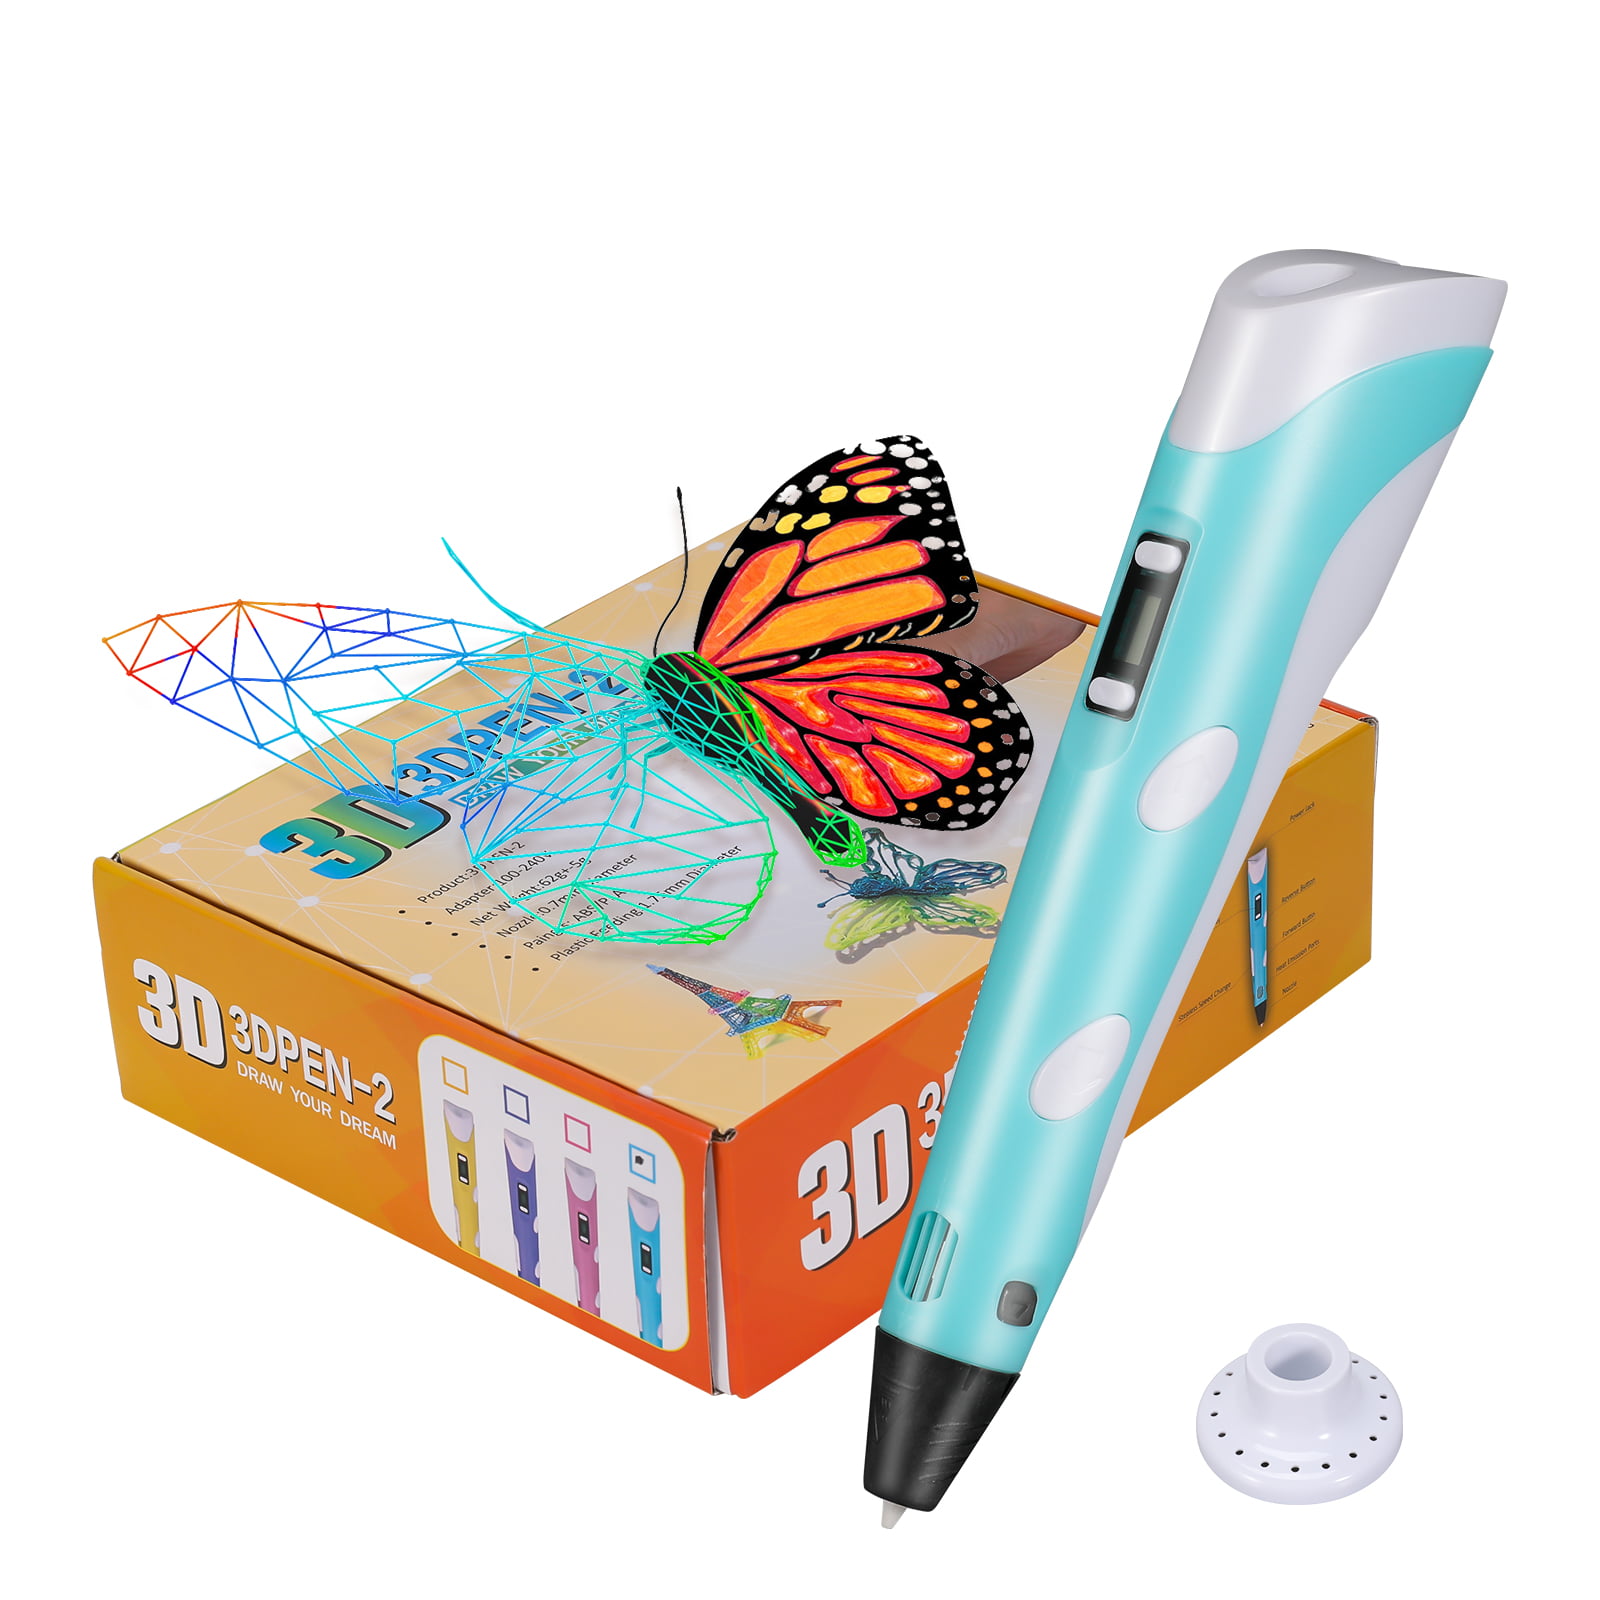 Elegant Choise 3D Pen for Kids and Adults Newest Low Temperature 3D Printing Pen with PCL Filaments for Model Making Arts and Gifts